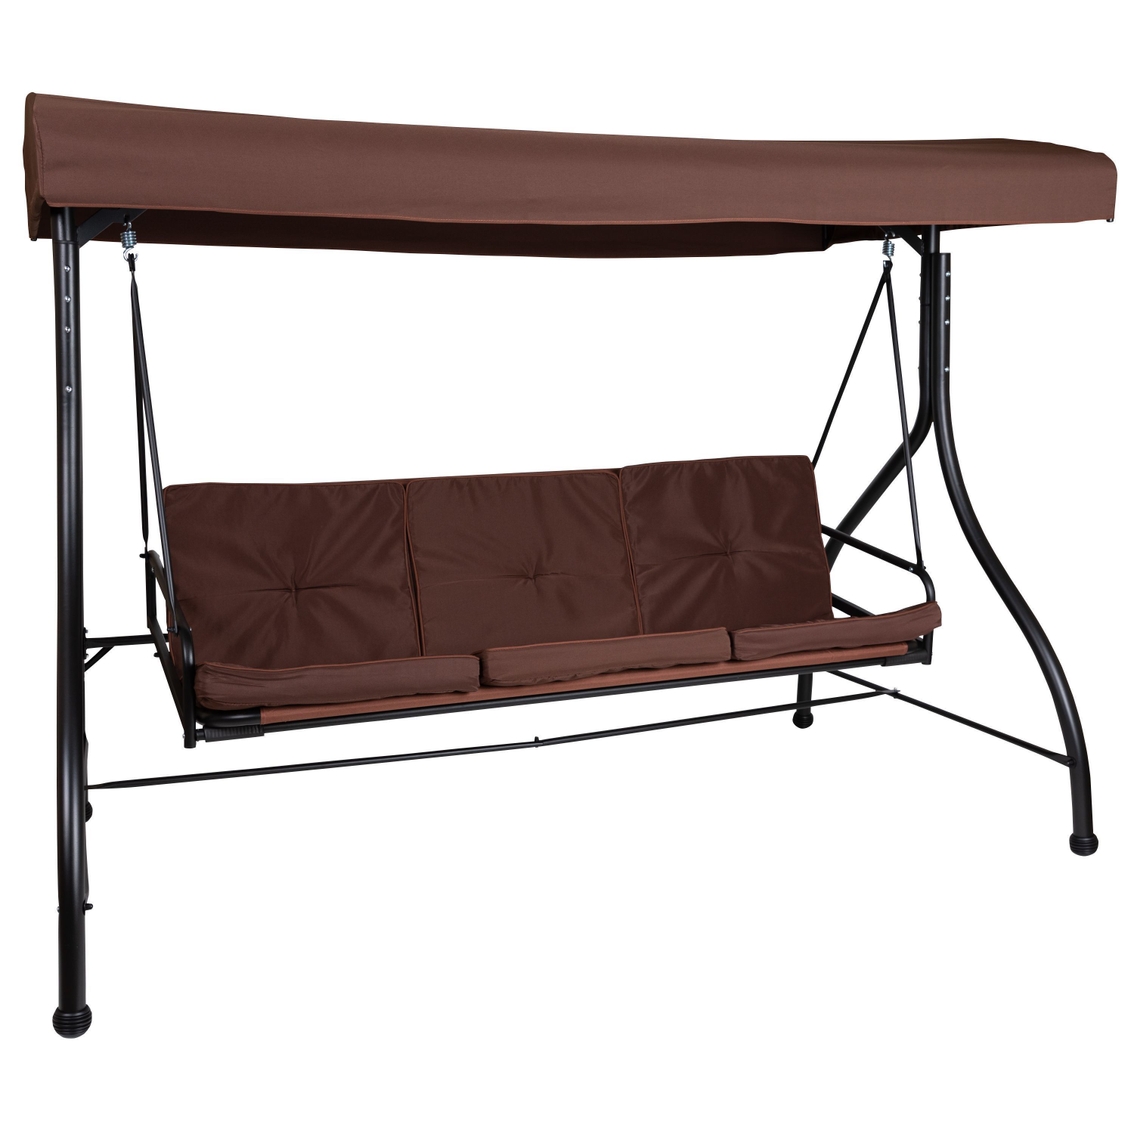 Flash Furniture 3-Seater Convertible Canopy Patio Swing / Bed - Image 3 of 5